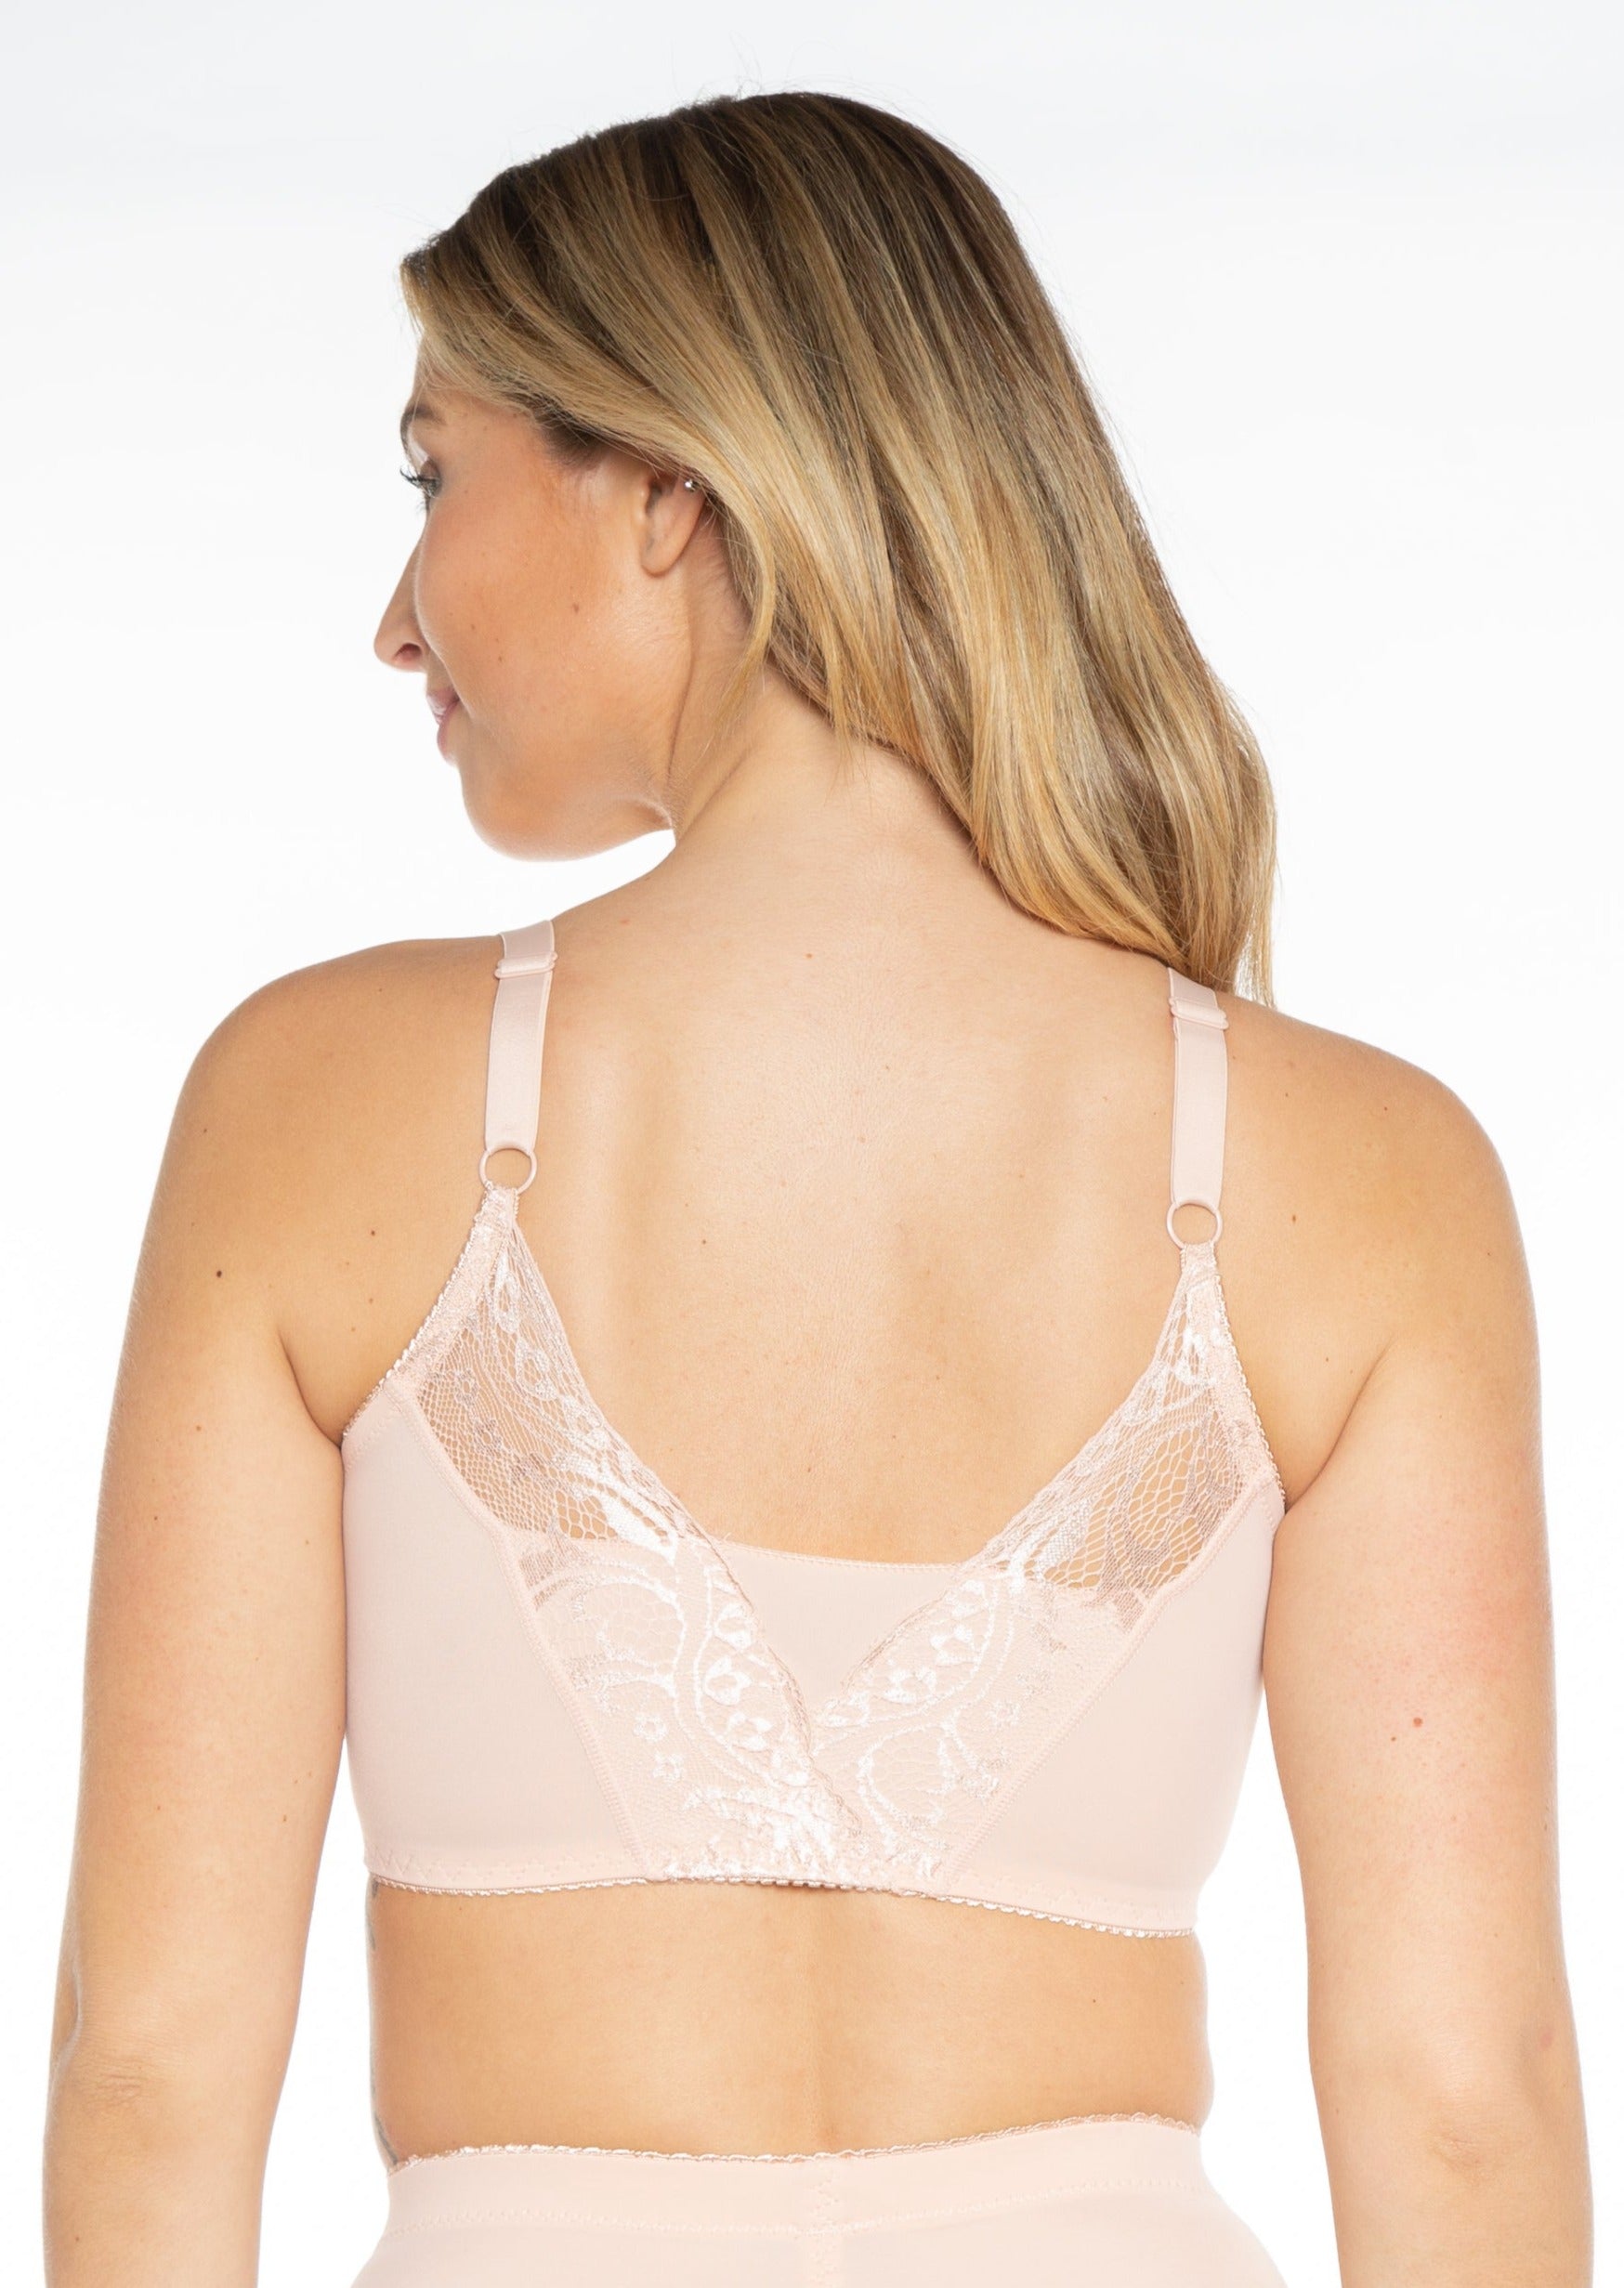 Rhonda Shear Molded Cup Bra with Lace Trim – goSASS